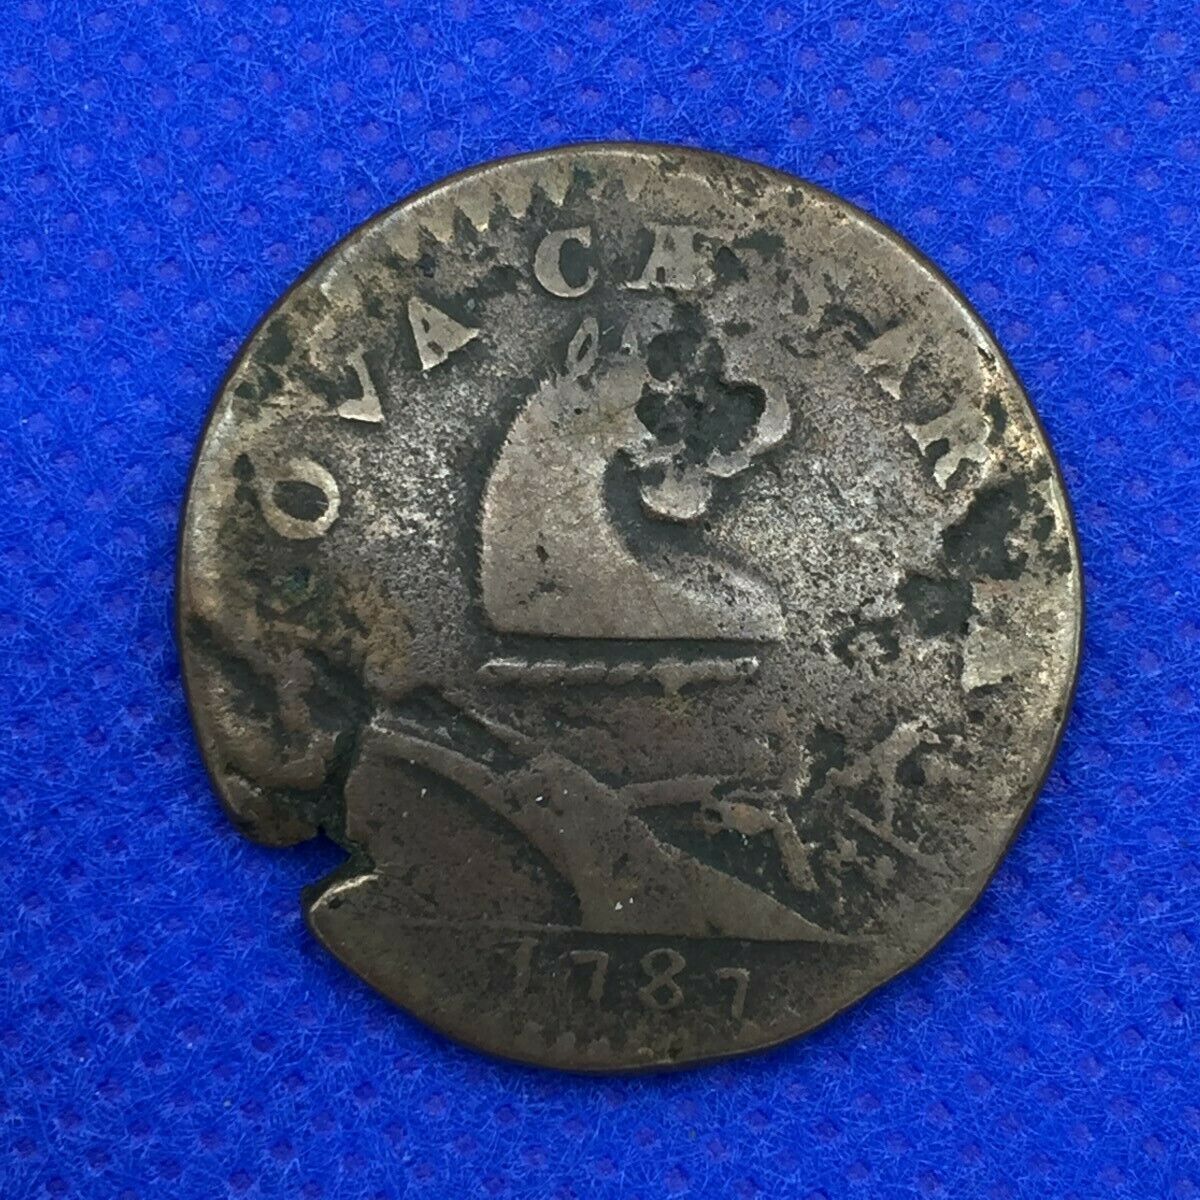 1787 New Jersey Large Copper Cent (eb1004112)